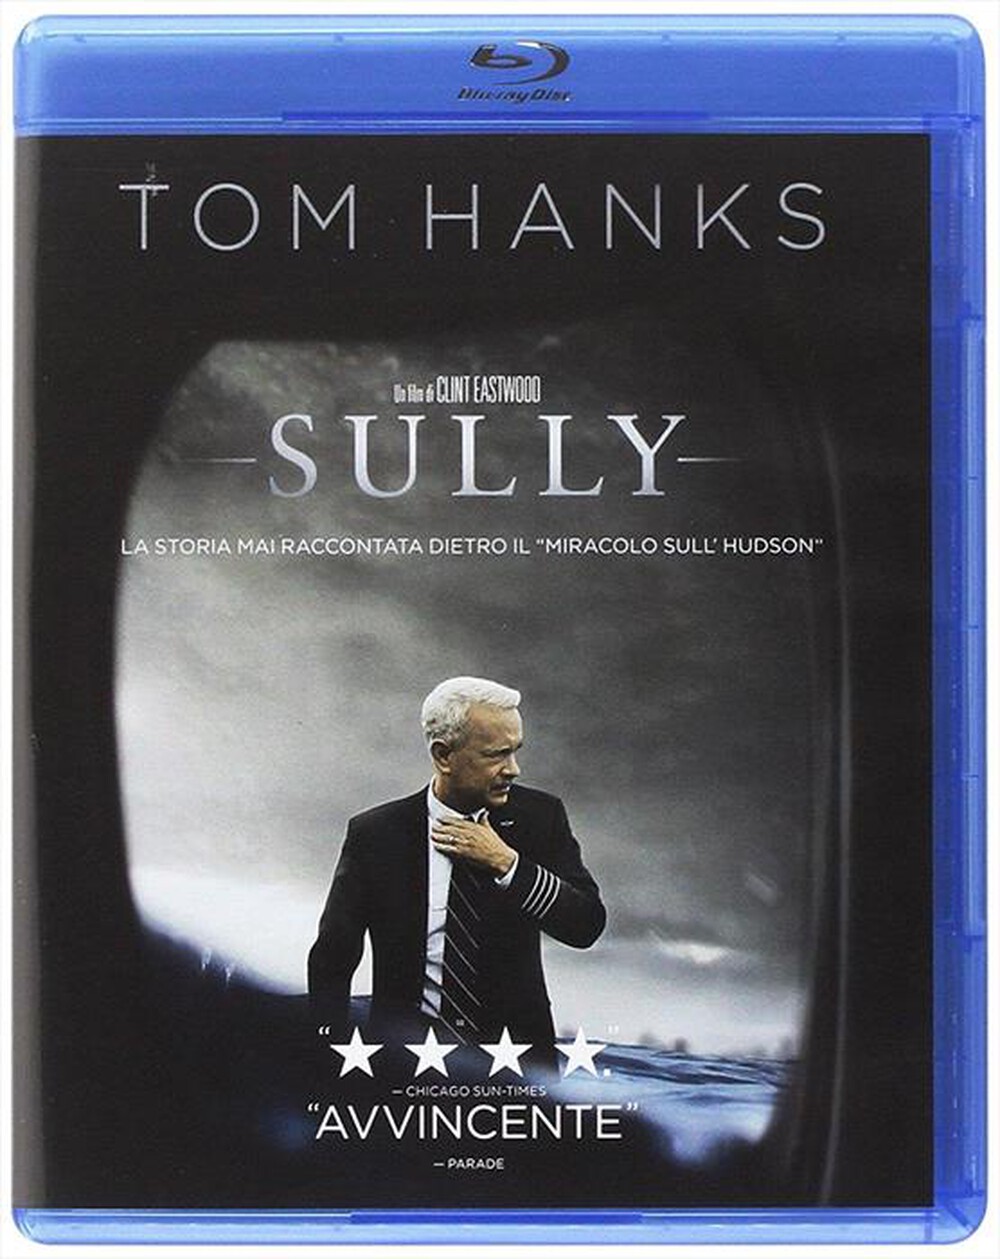 "WARNER HOME VIDEO - Sully"